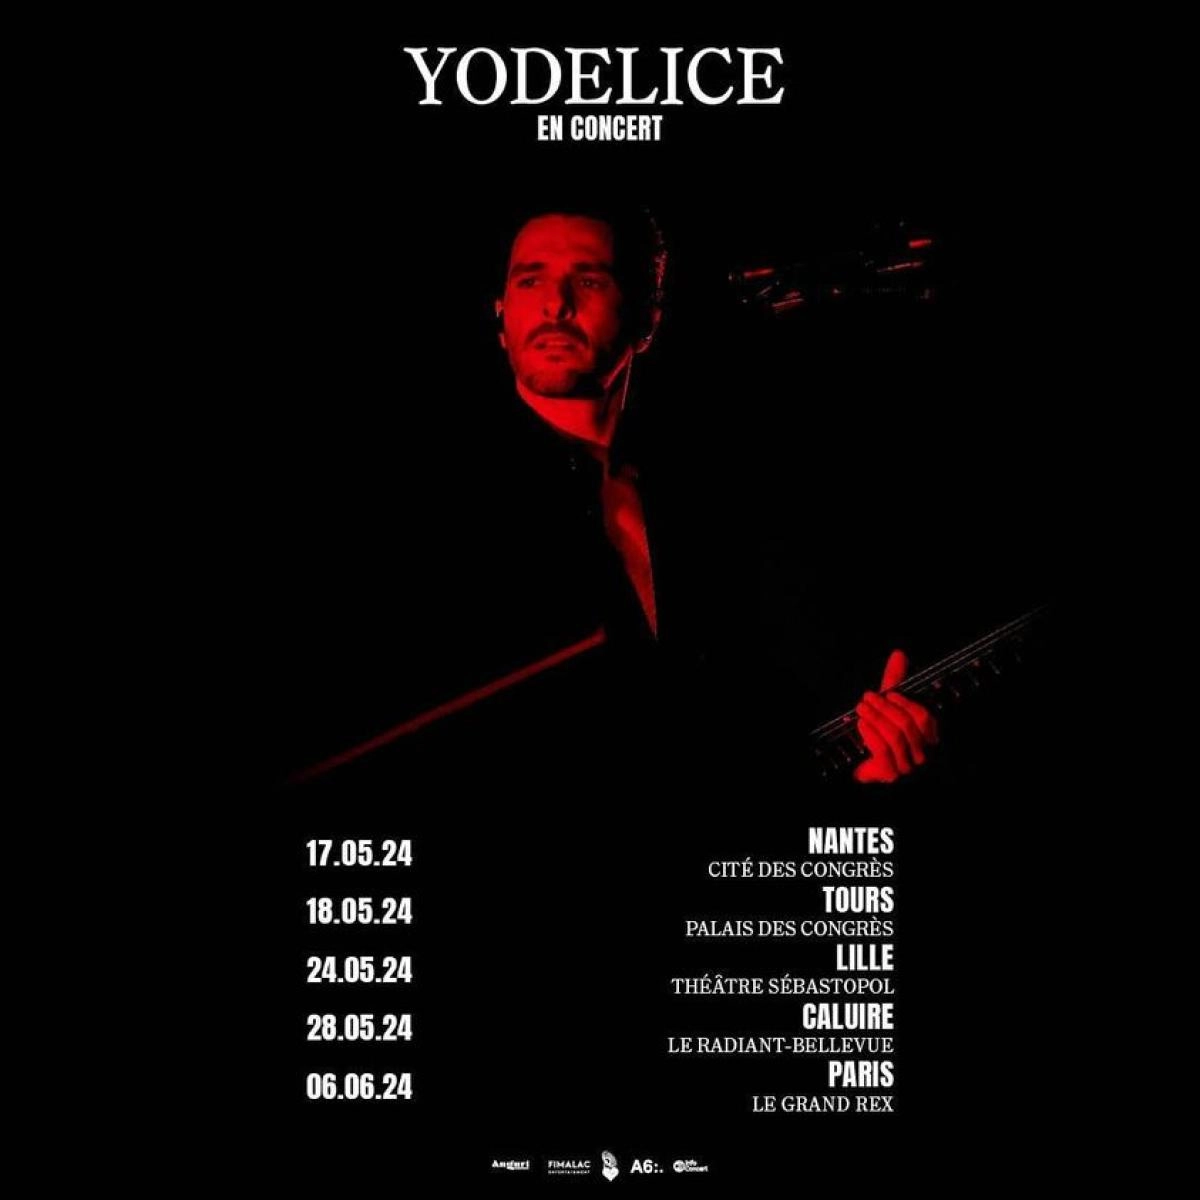 Yodelice at Radiant Bellevue Tickets